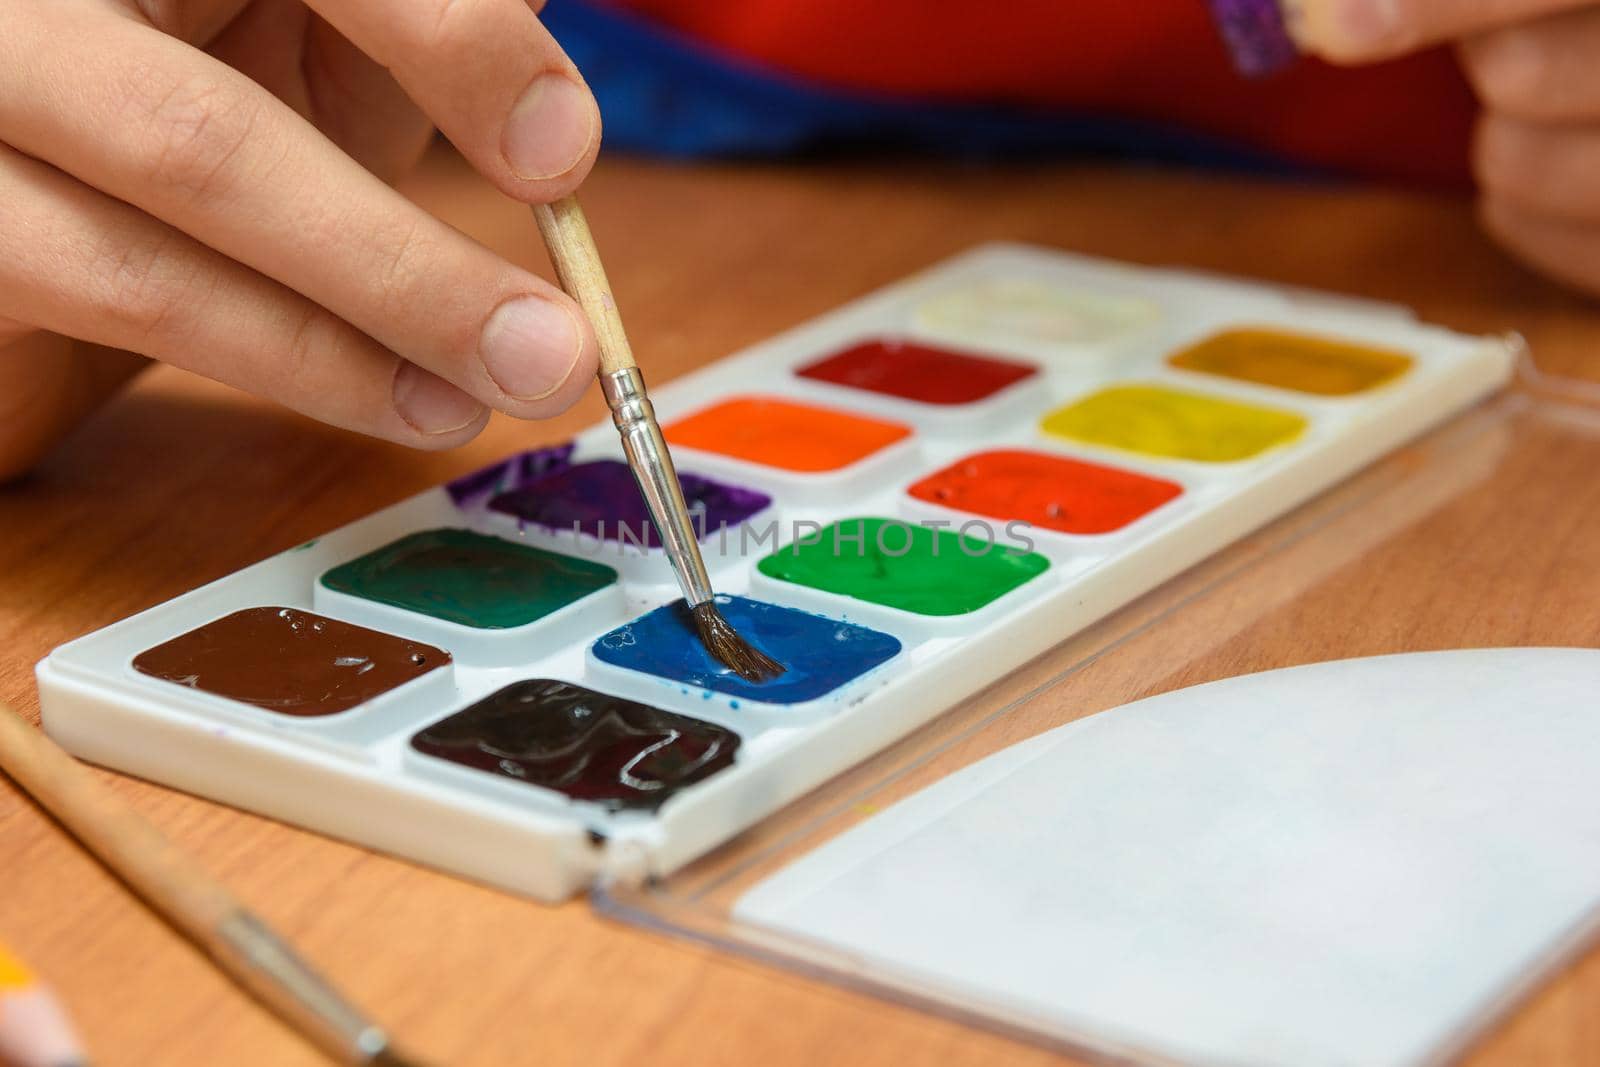 The child's hands are dipping with a brush in the desired color of watercolor paints